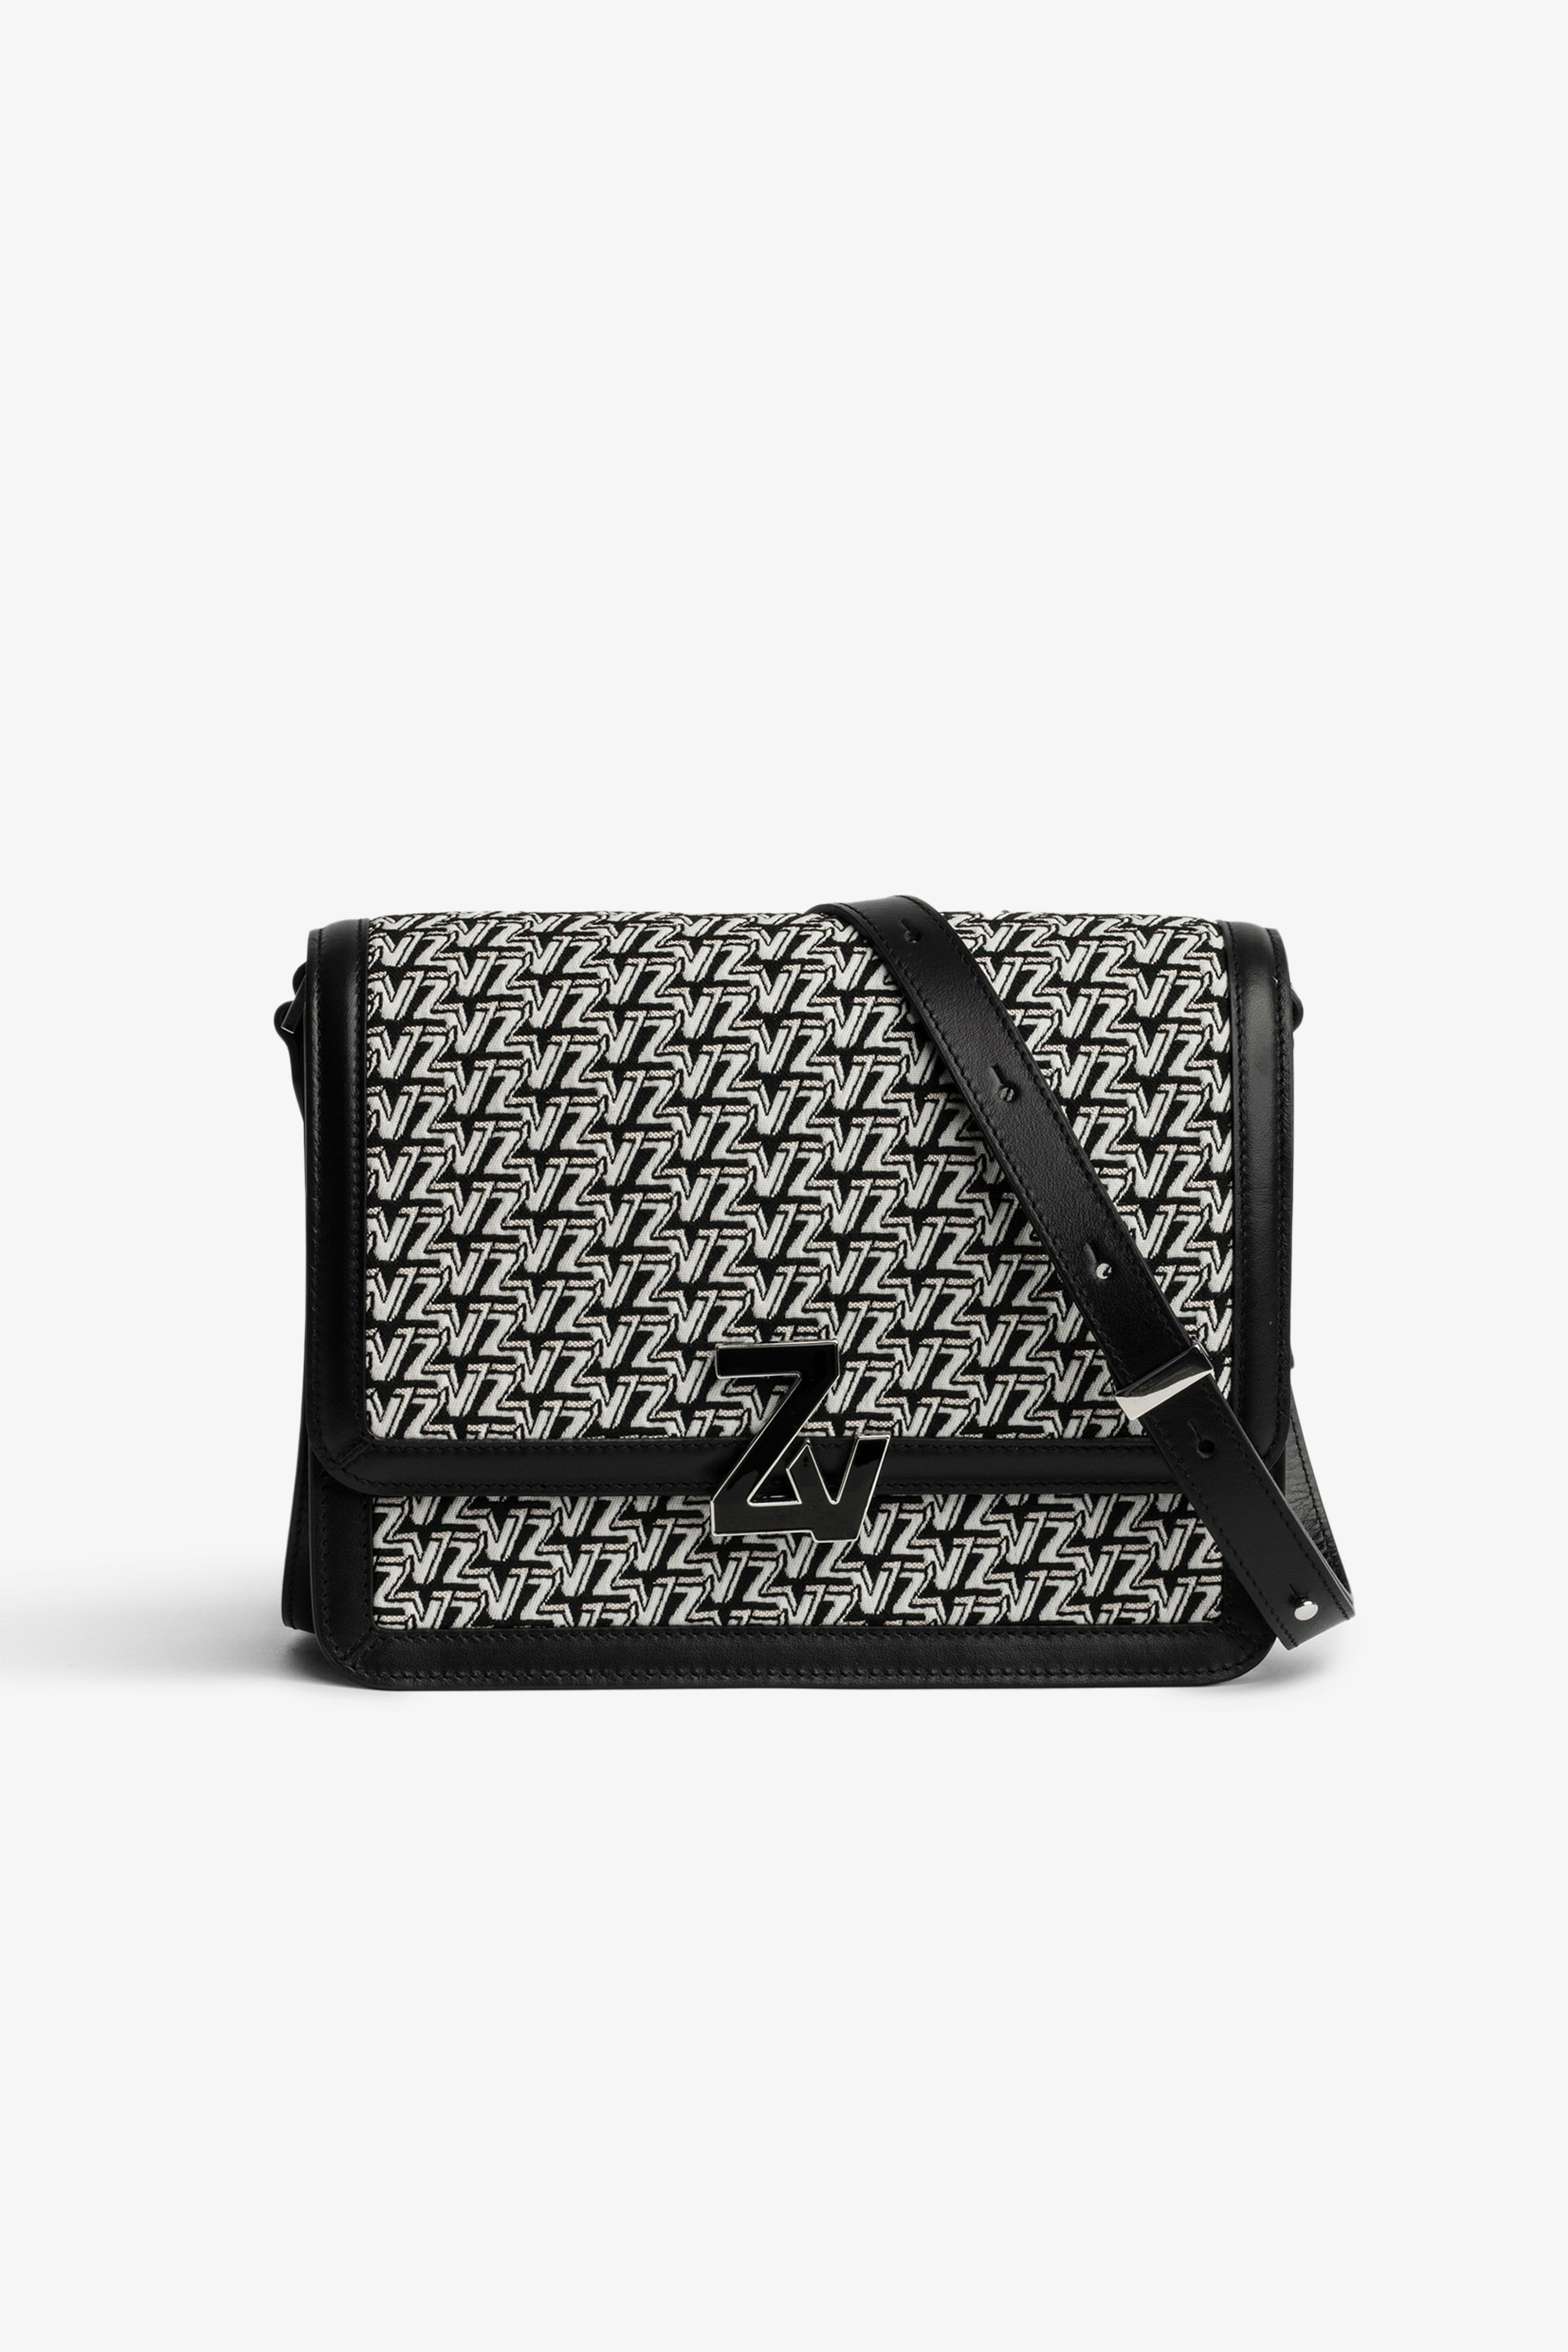 ZV Initiale Le City Monogram Bag Women’s bag in black leather and ZV jacquard with flap and shoulder strap